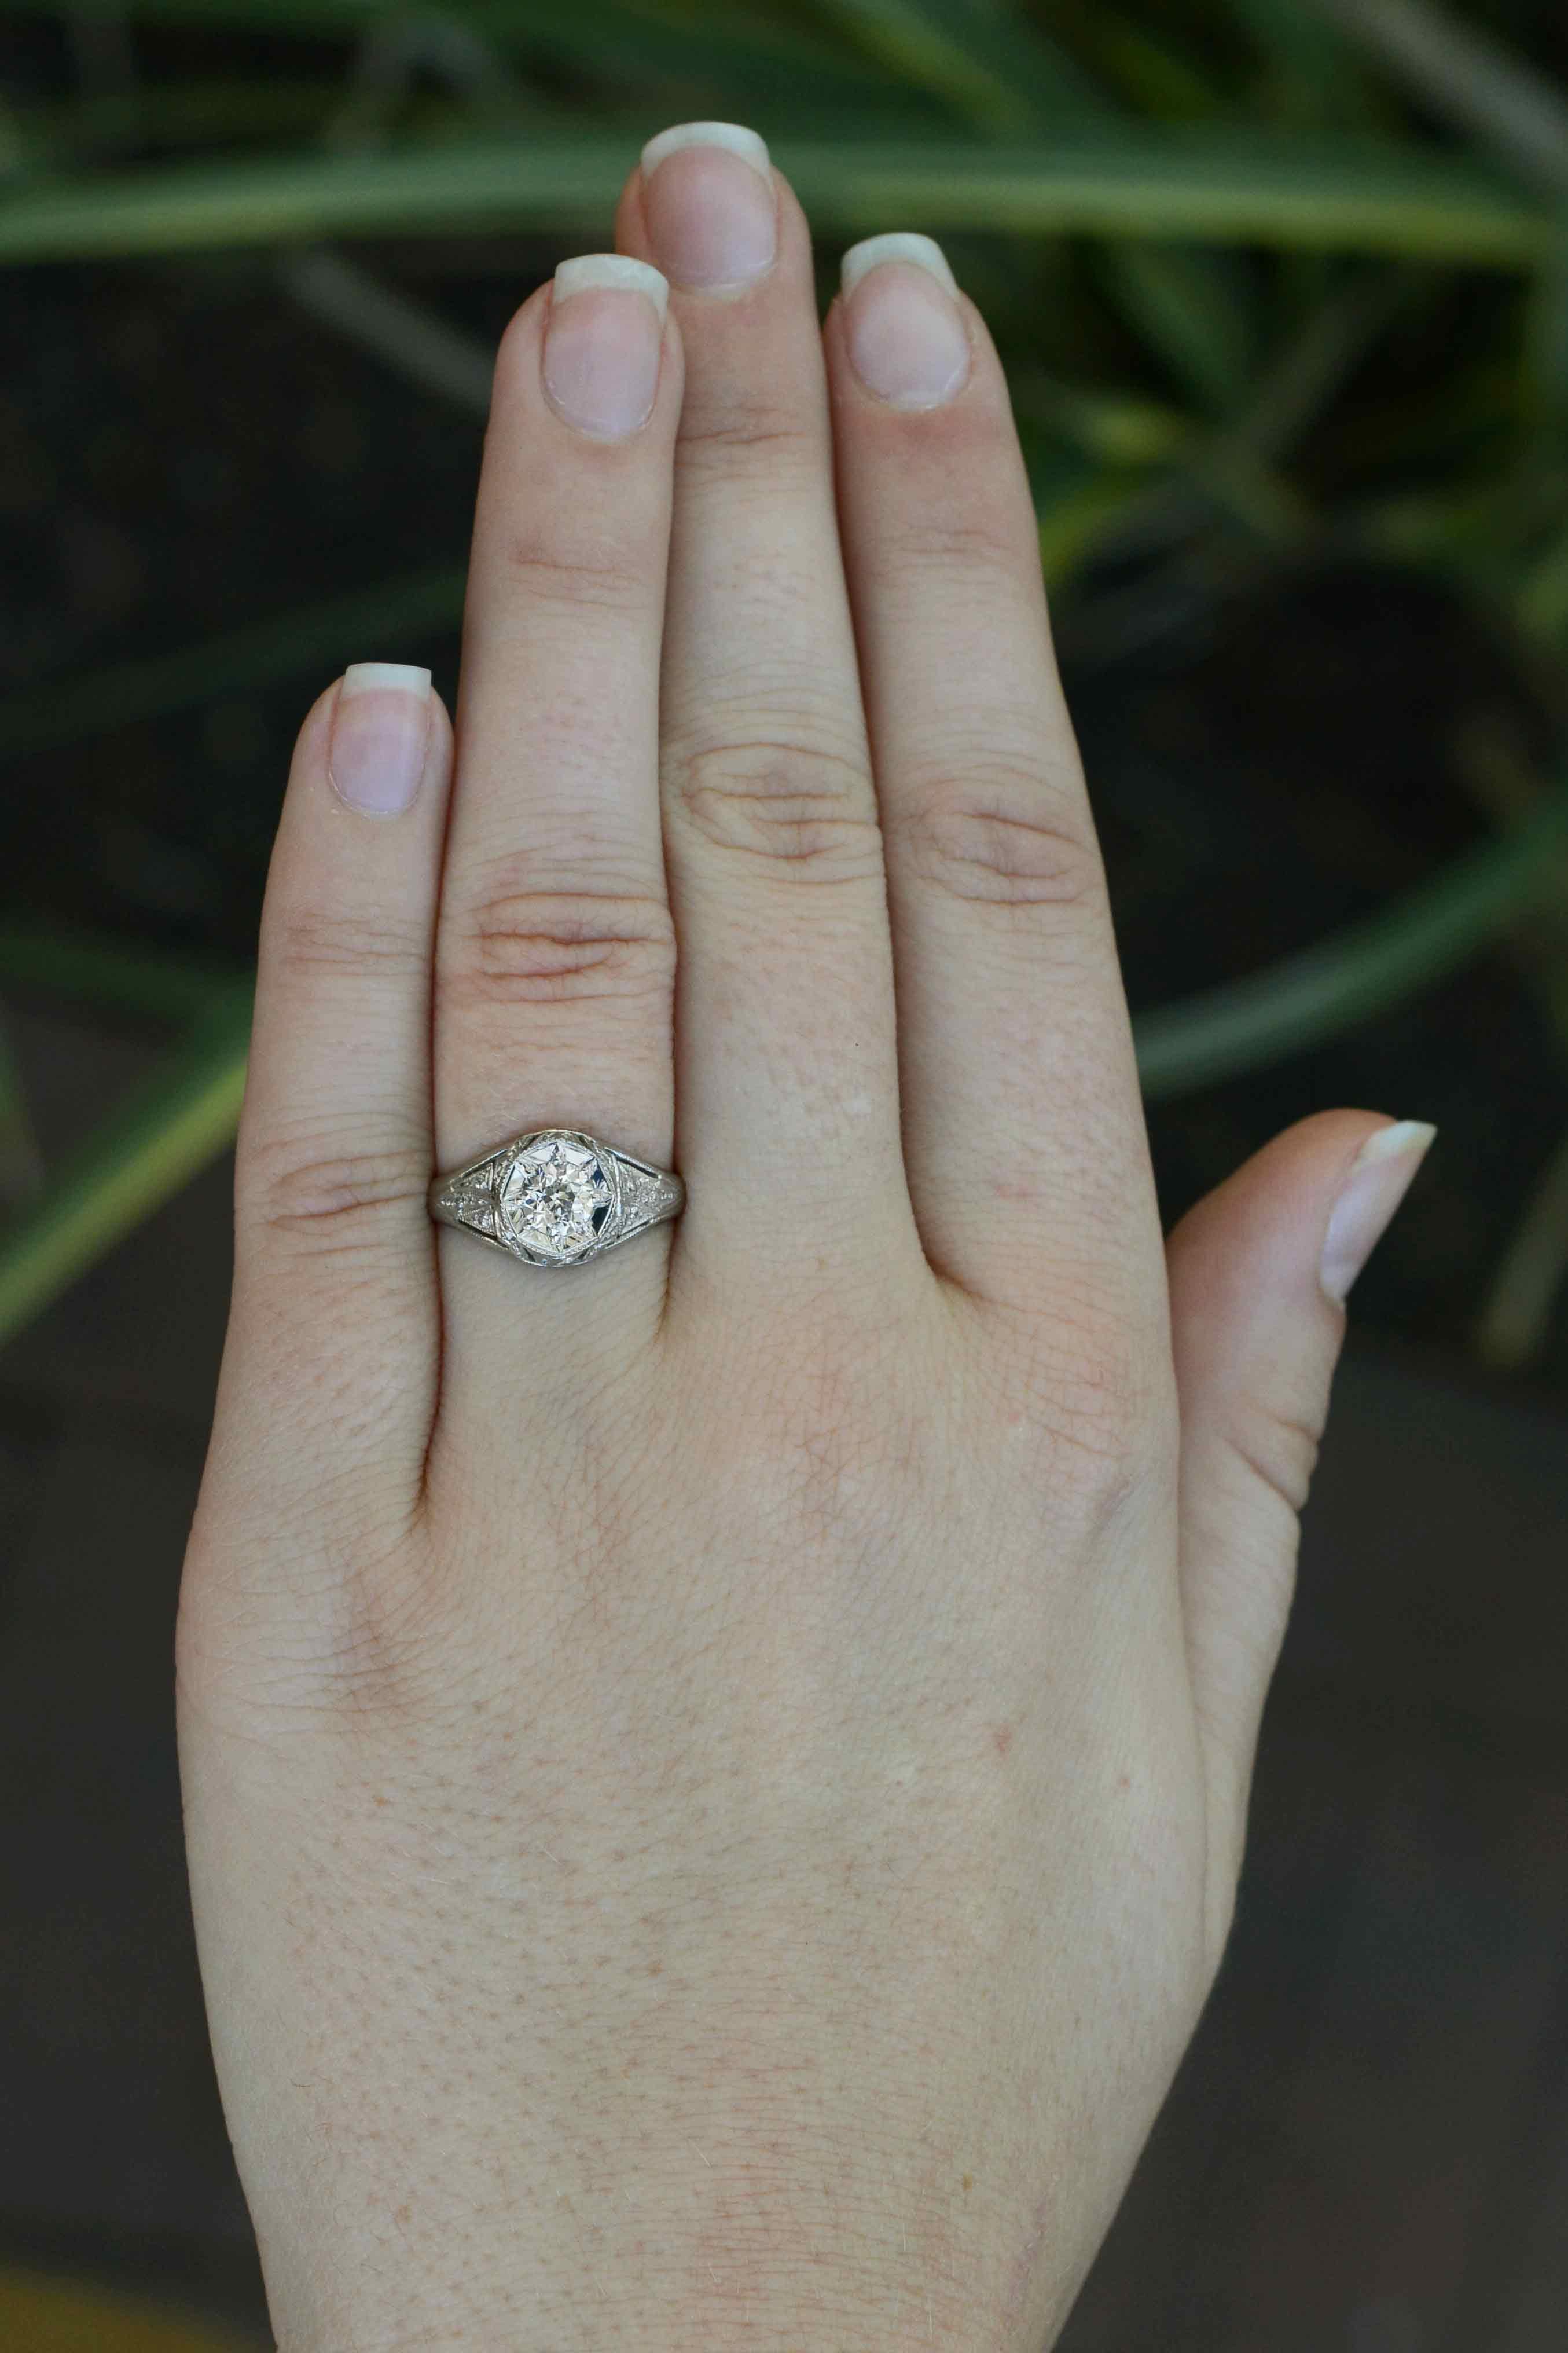 An authentic Art Deco filigree diamond engagement ring with a lively and bright half carat old European cut brilliant center. GIA certified as near-colorless, this circa 1920s original antique platinum stunner really allows you to experience the